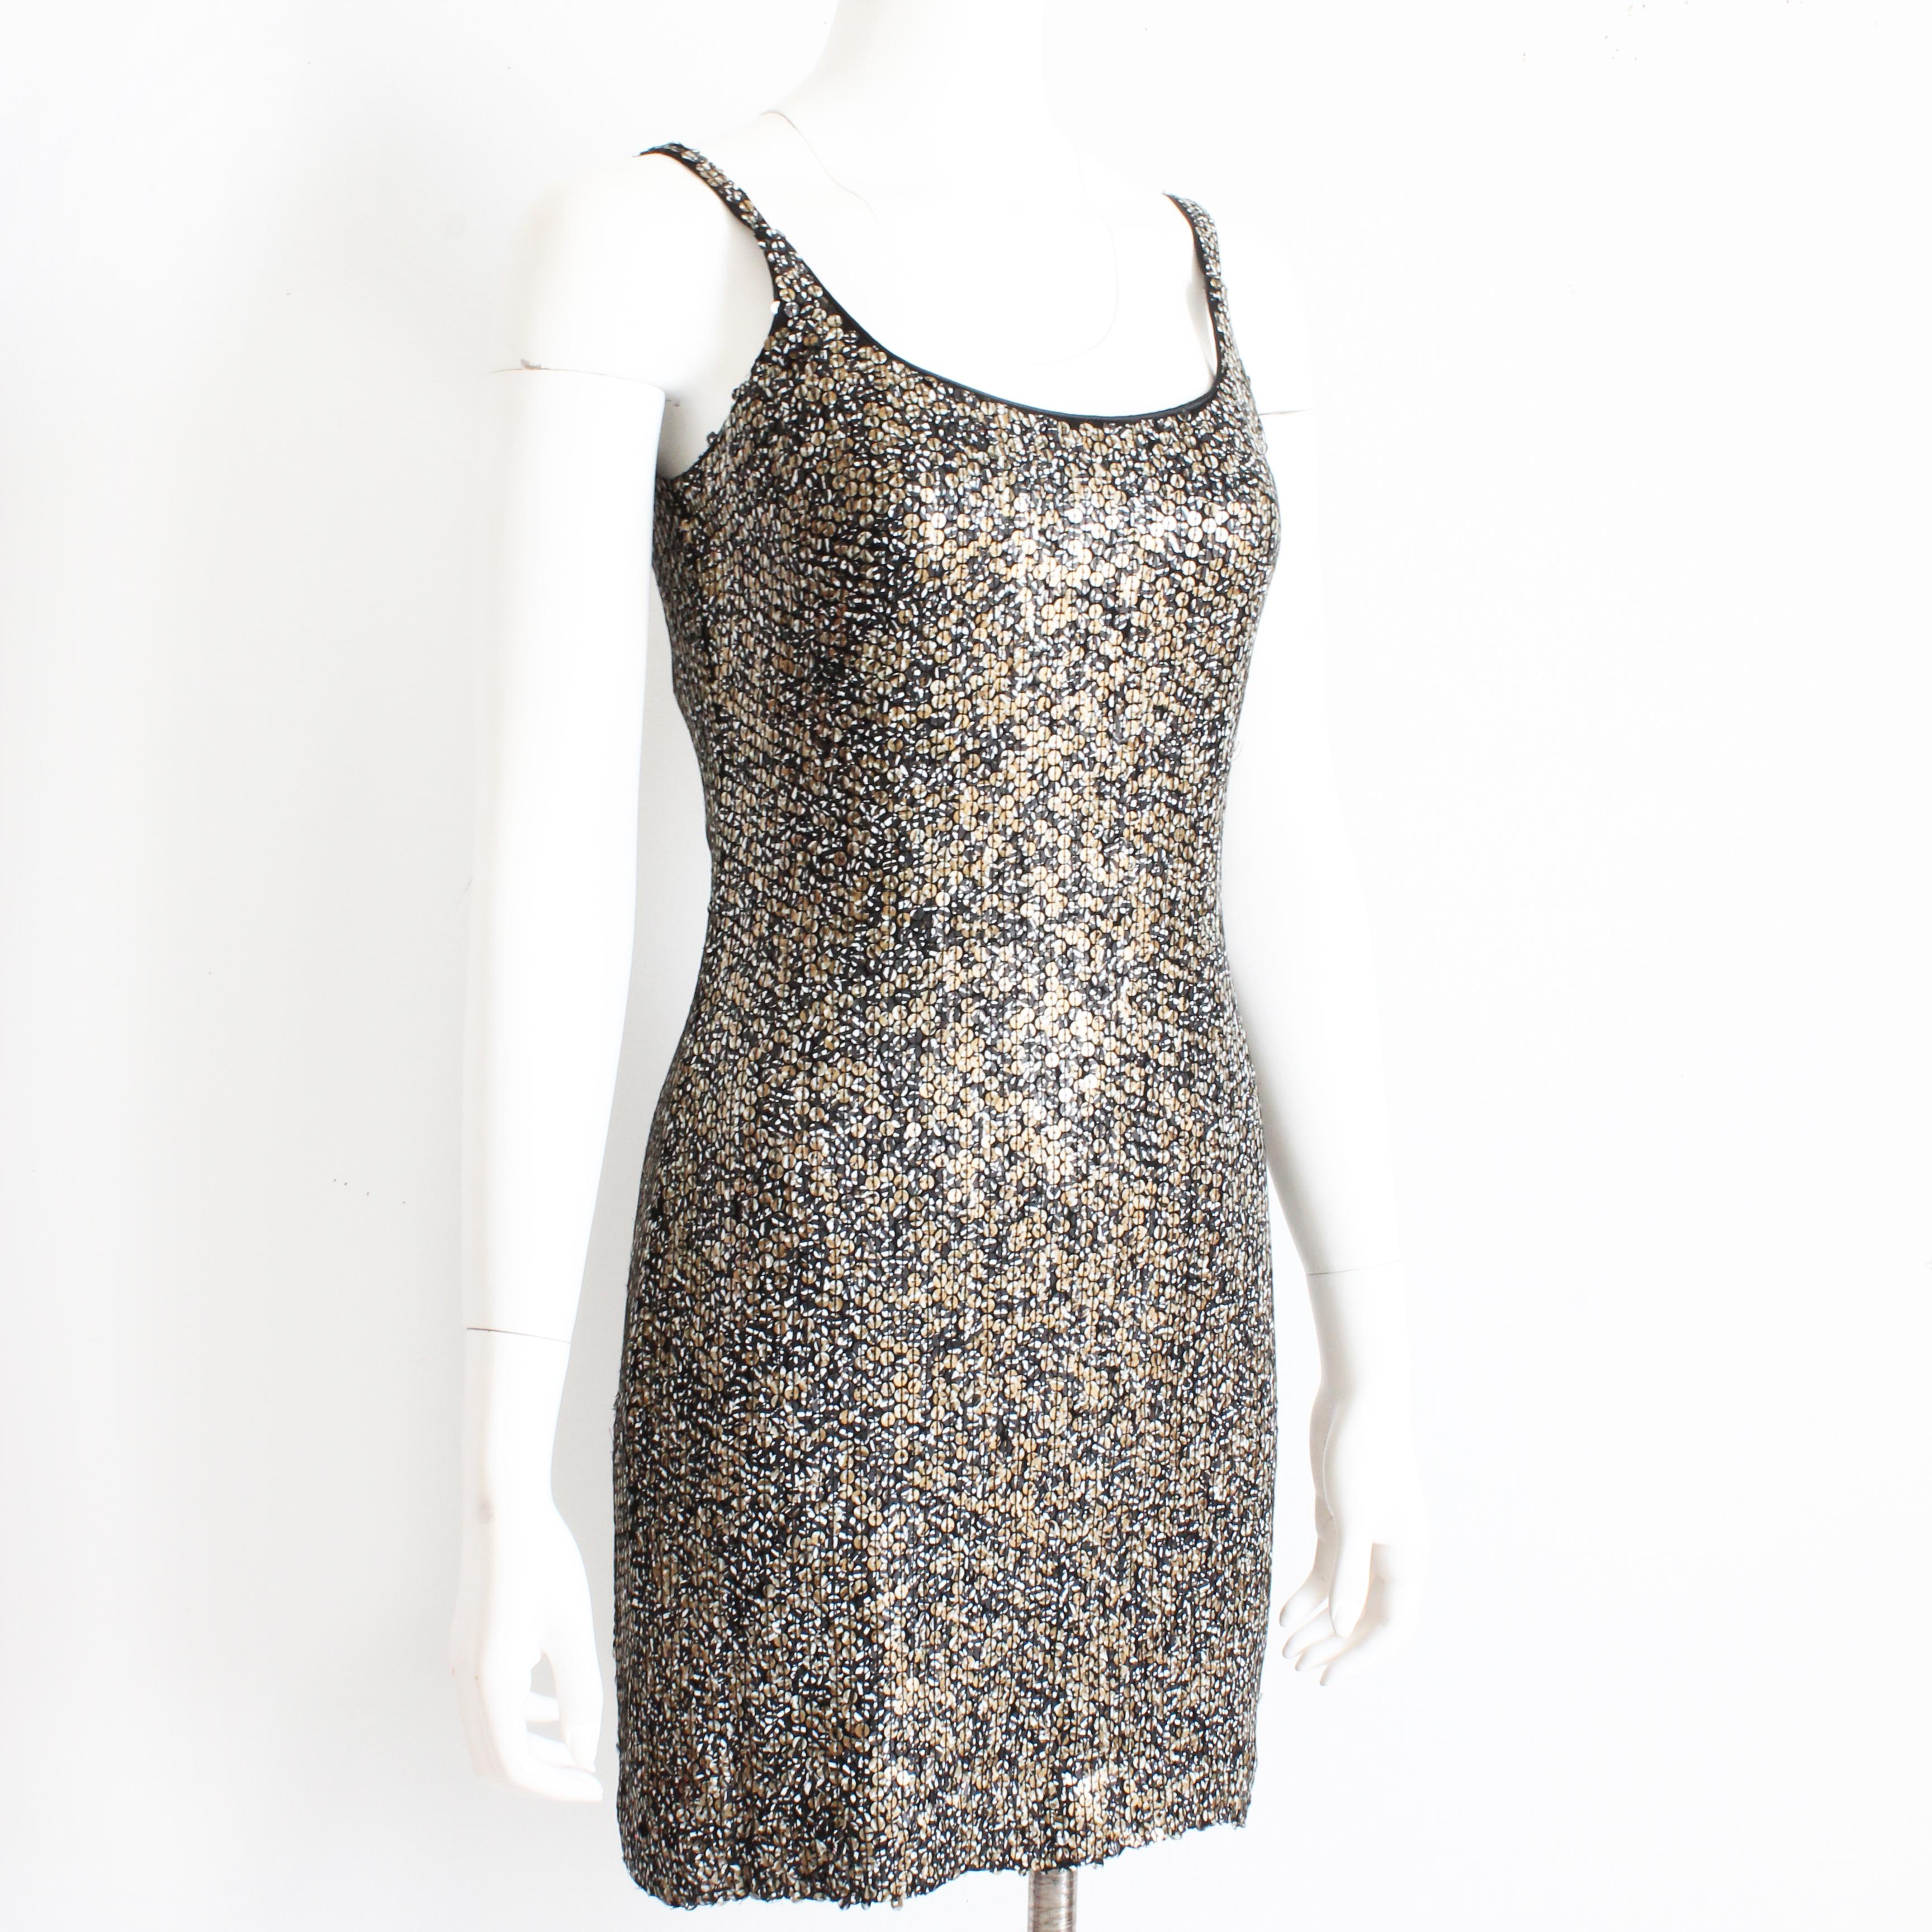 Authentic, preowned, vintage St Martin by Jeanette sexy embellished cocktail dress, likely made in the 90s by designer Jeanette Kastenberg. The perfect party dress that's so easy to style. The matte sequins give it just the right amount of twinkle